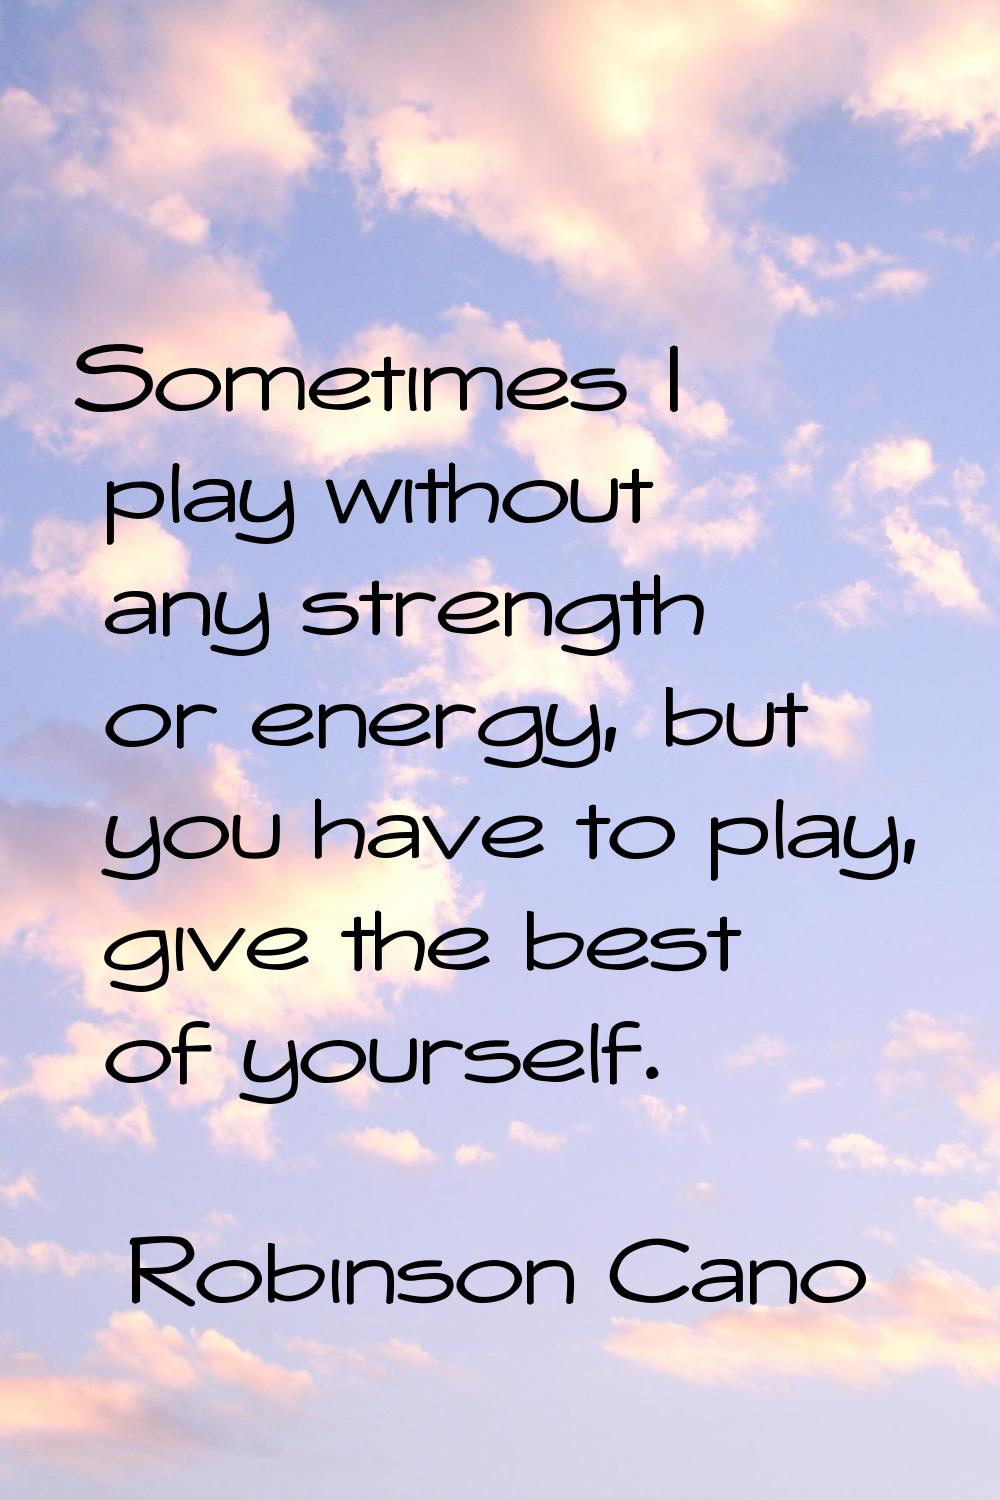 Sometimes I play without any strength or energy, but you have to play, give the best of yourself.